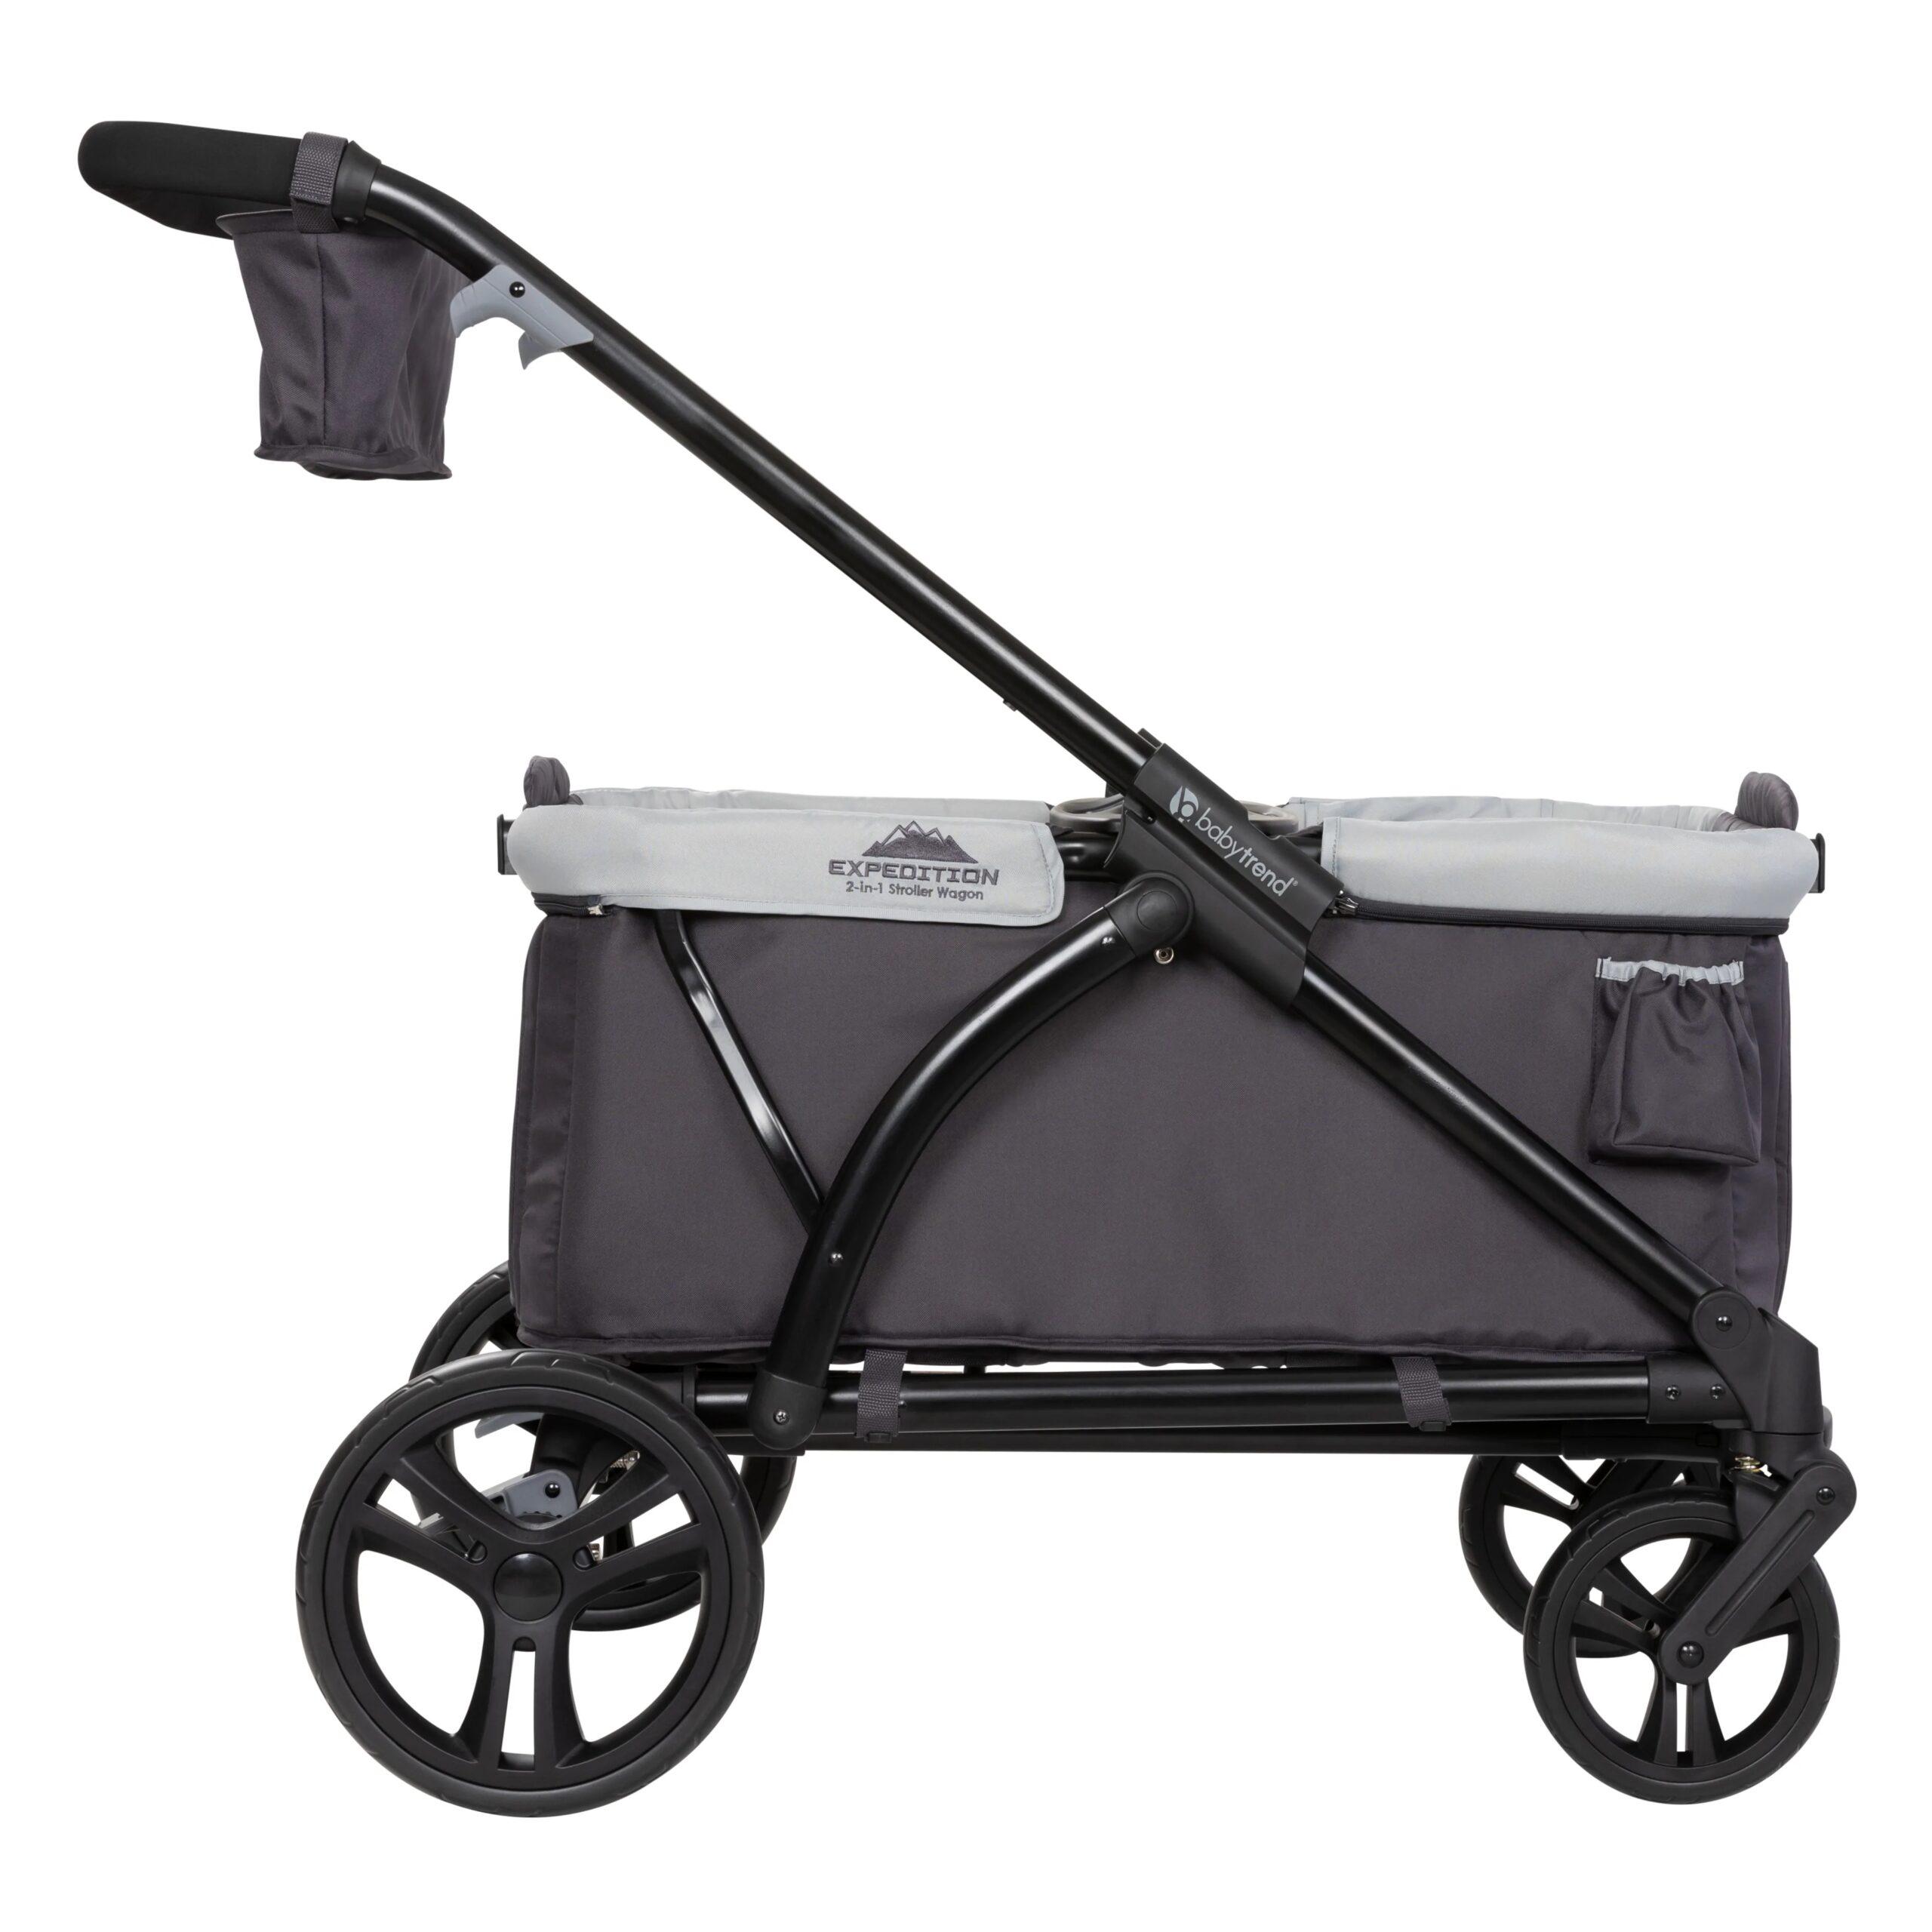 When it comes to uneven terrain, sandy beaches, or rocky mountain trails, a regular stroller just won’t cut it! Thankfully there is a solution that will survive any environment, while also providing extra storage space and convenience. Cue the Wagon Stroller! 9f88ee25 baby trend expedition scaled